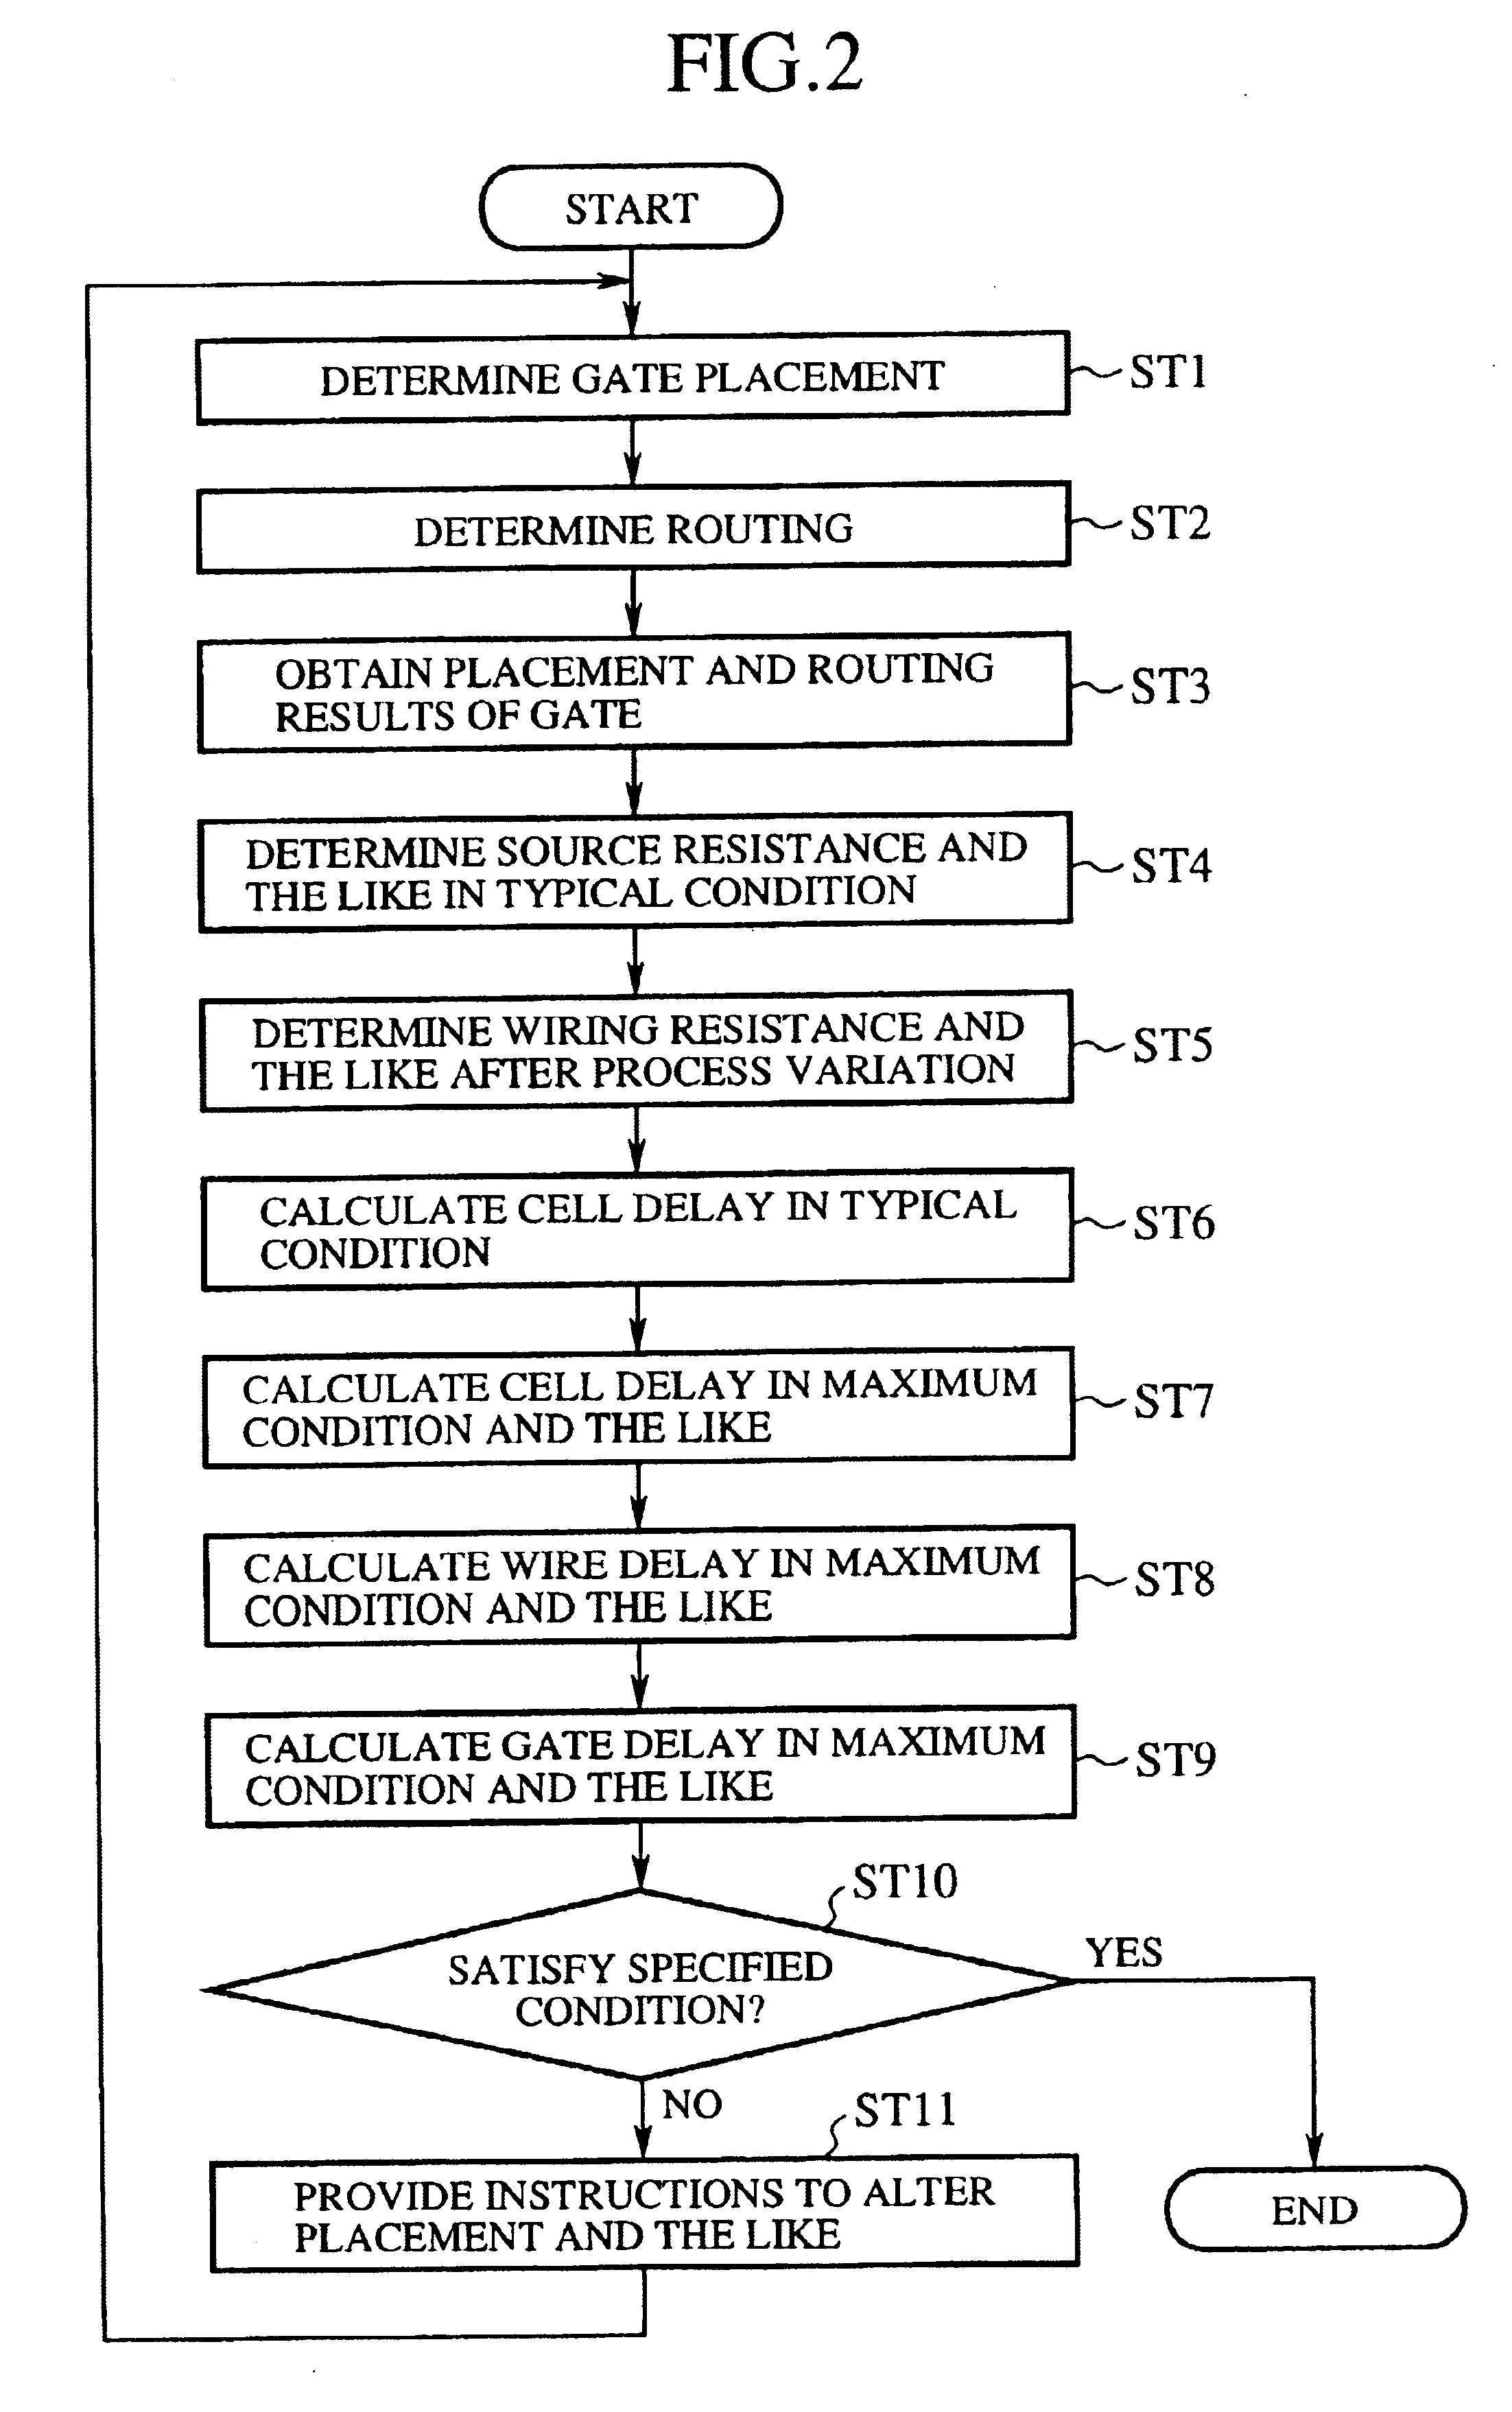 Delay time calculation apparatus and integrated circuit design apparatus